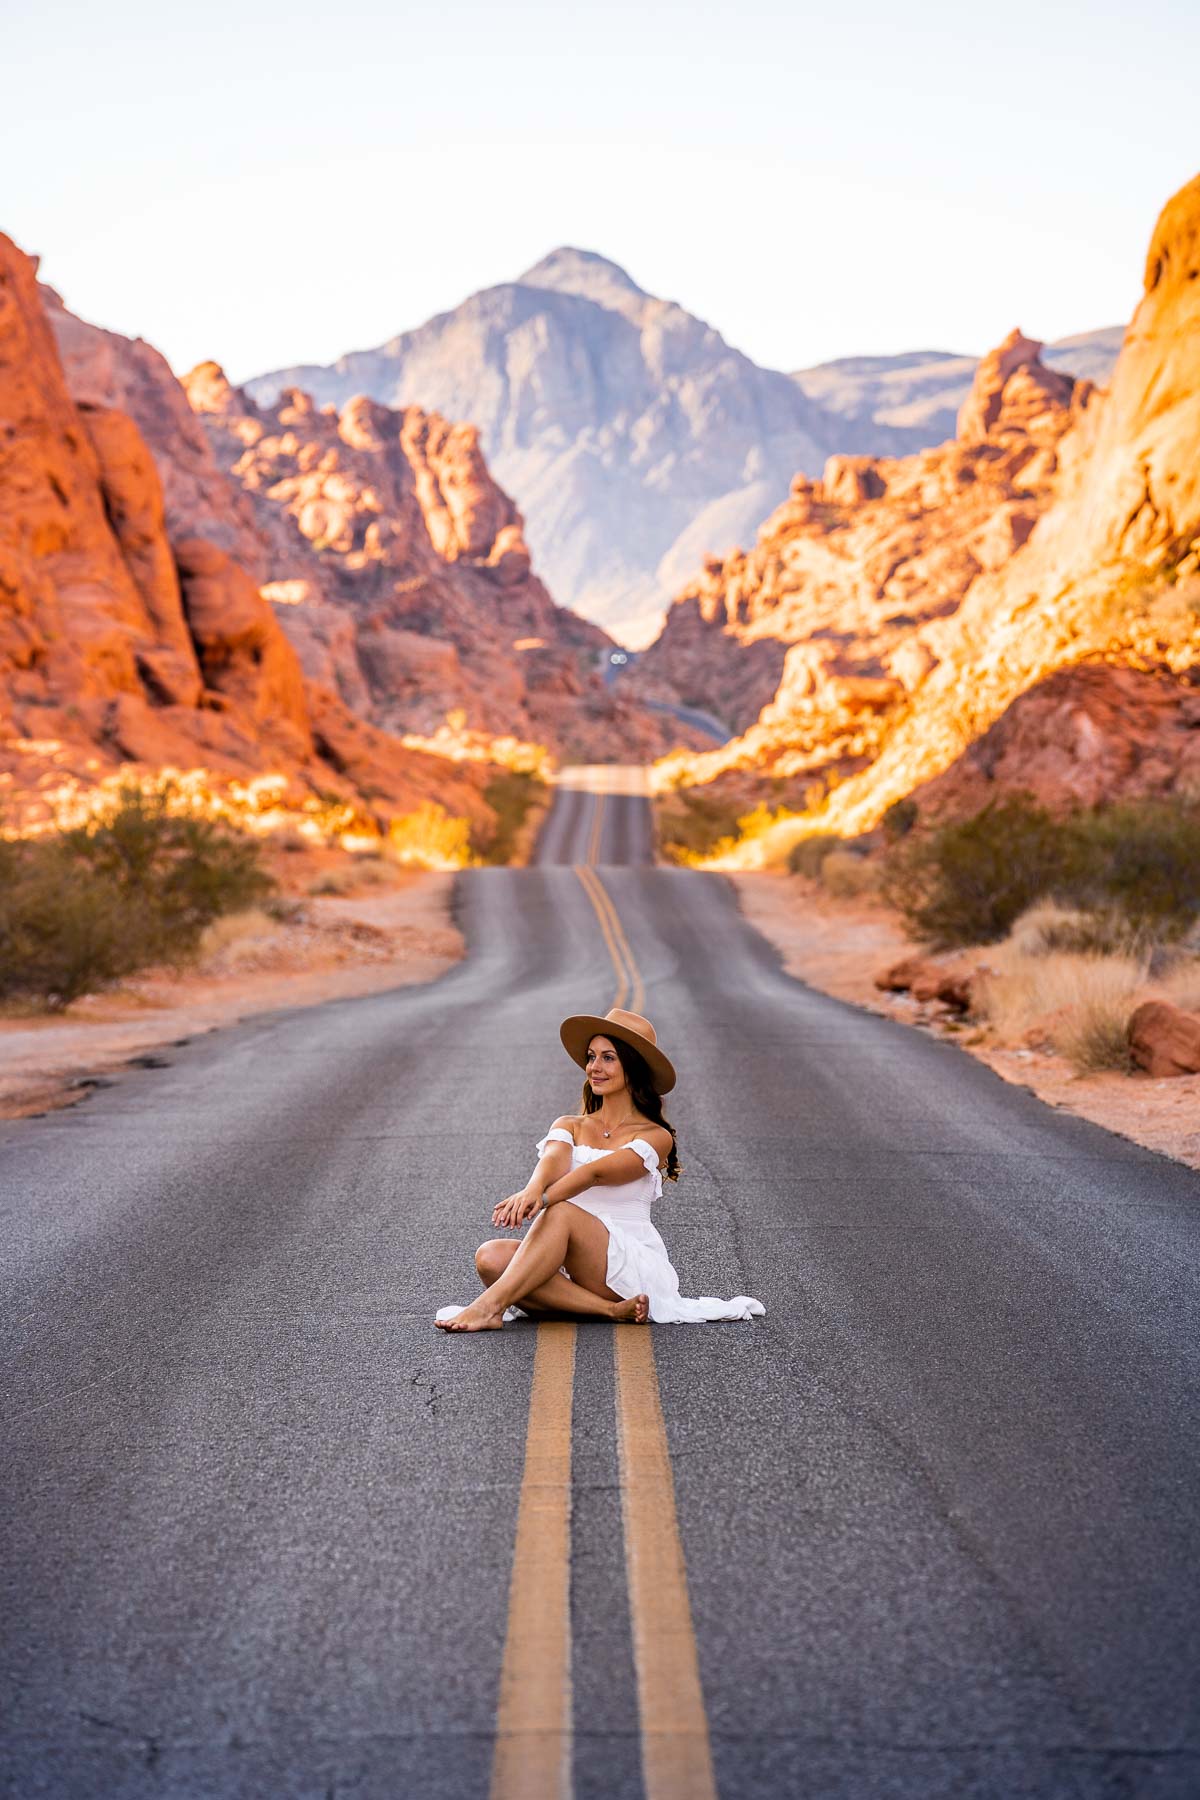 Girl in a white dress at Mouse Tank Road in Valley of Fire State Park